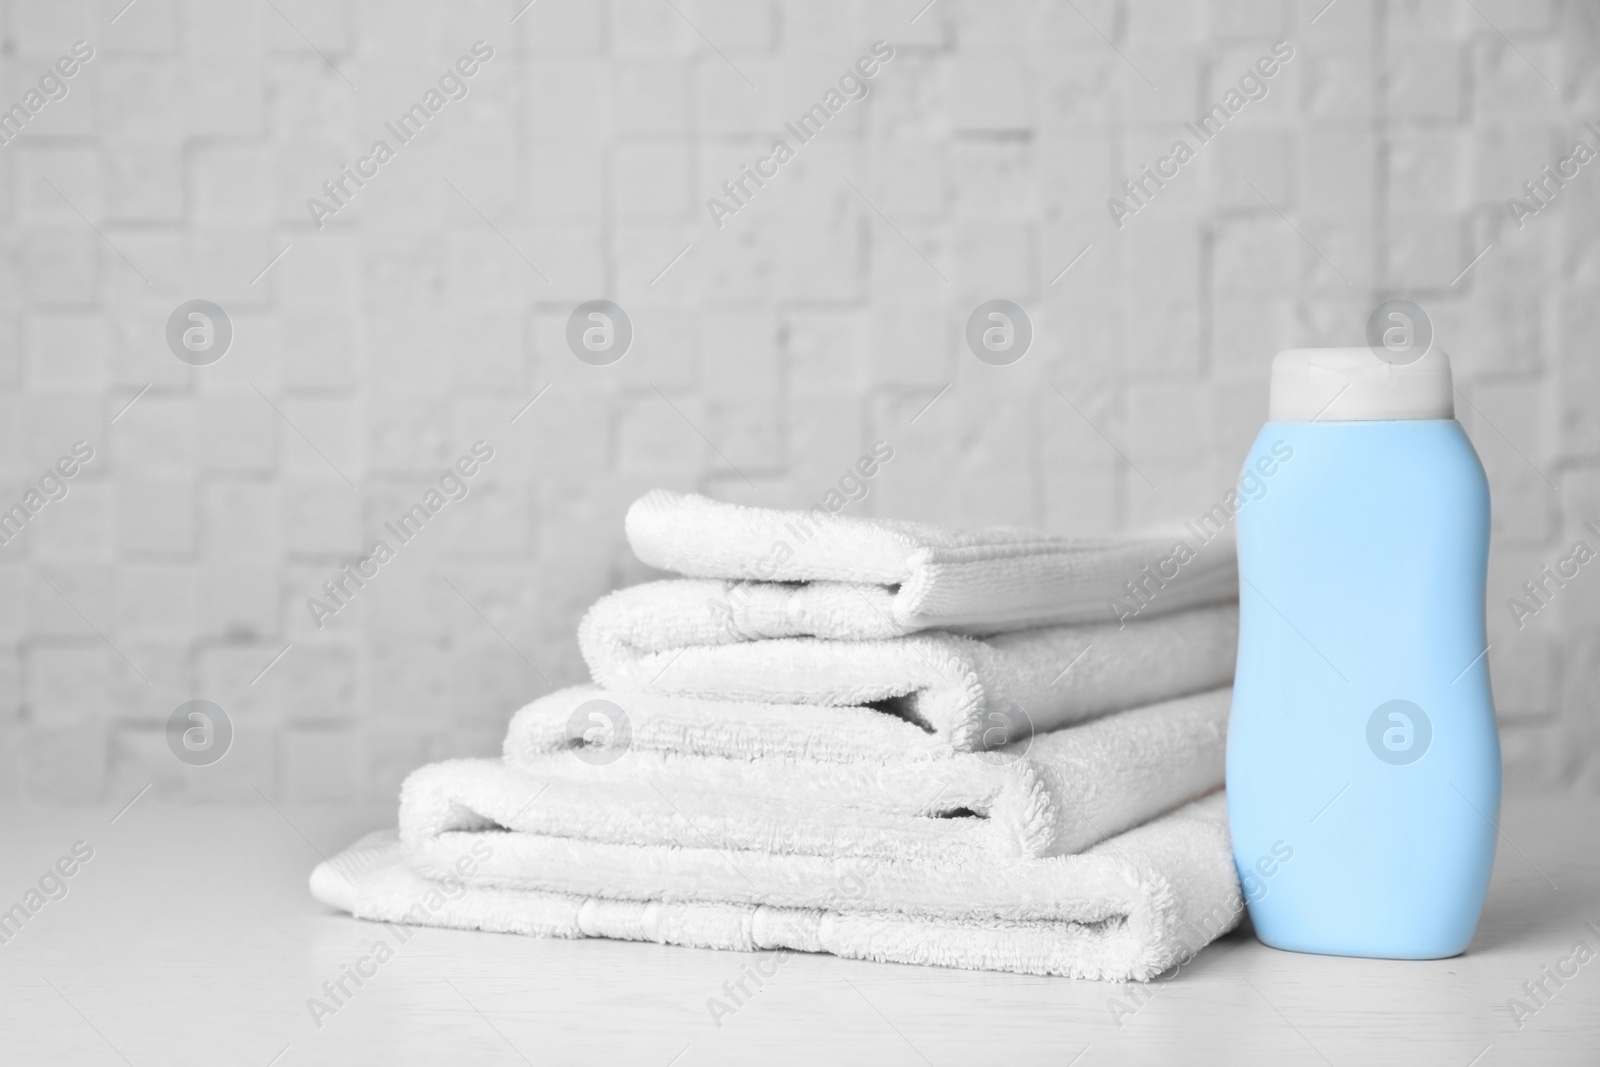 Photo of Bottle with shampoo and soft bath towels on table